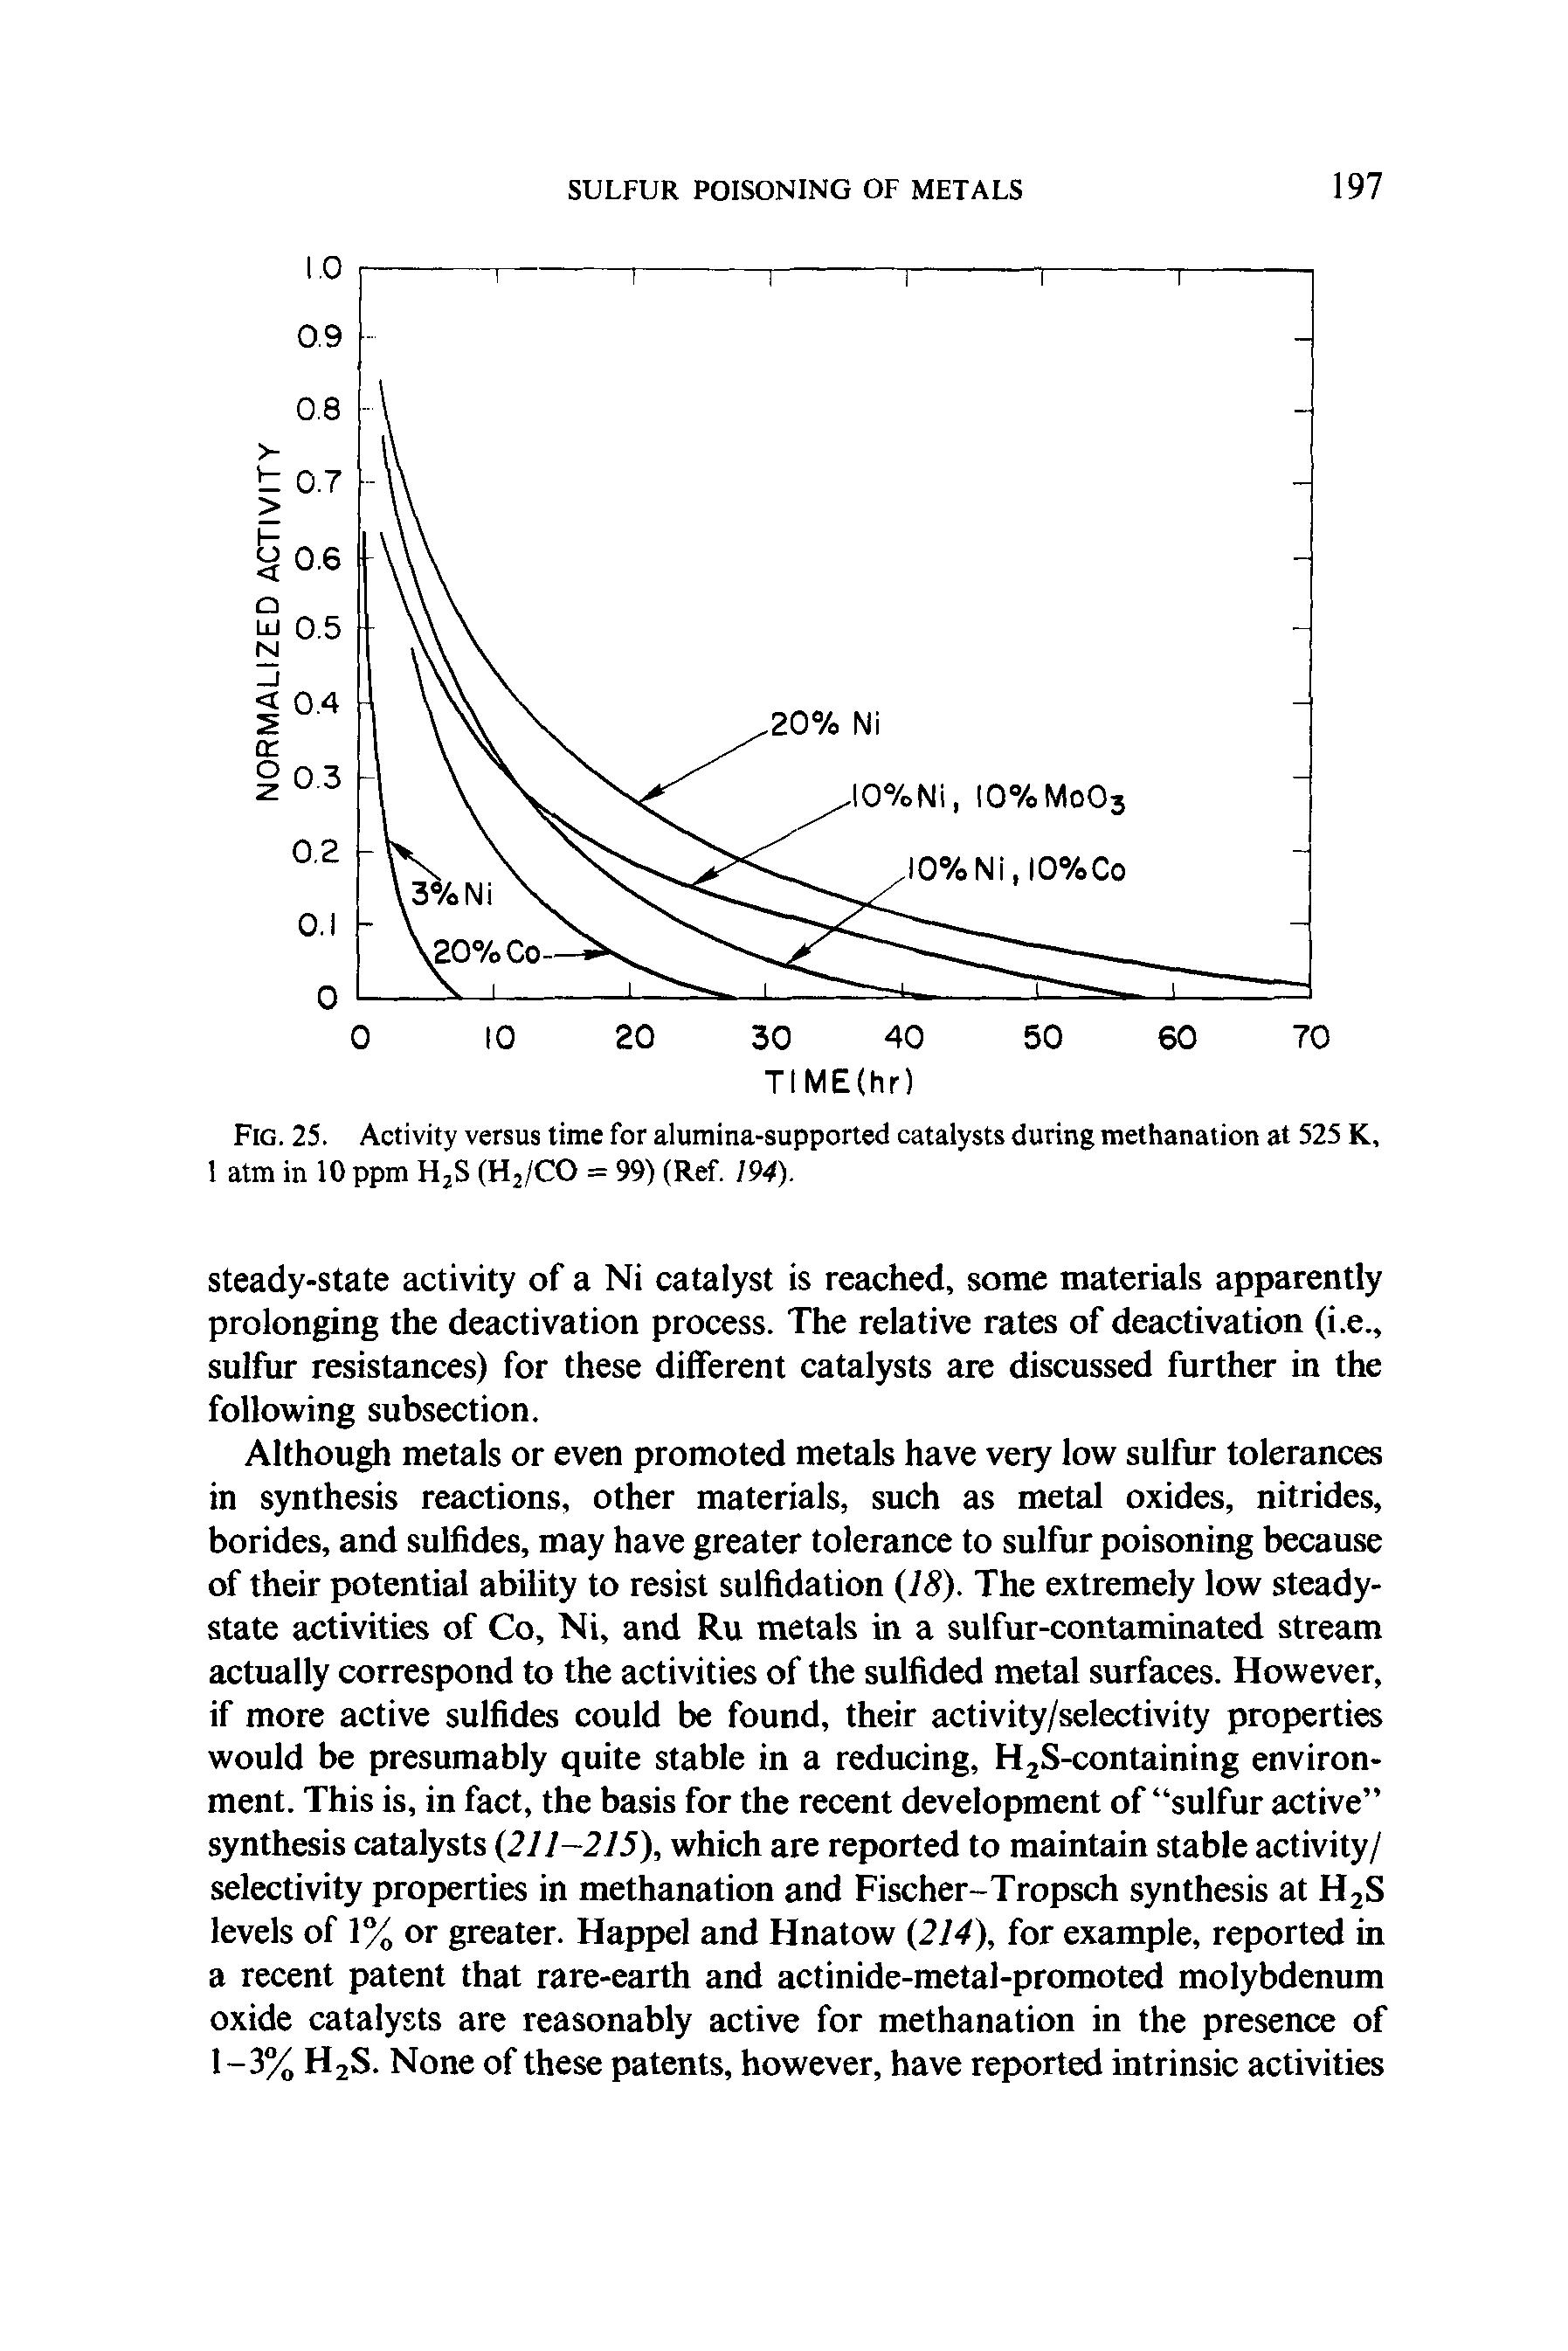 Fig. 25. Activity versus time for alumina-supported catalysts during methanation at 525 K, 1 atm in 10 ppm H2S (H2/CO = 99) (Ref. 194).